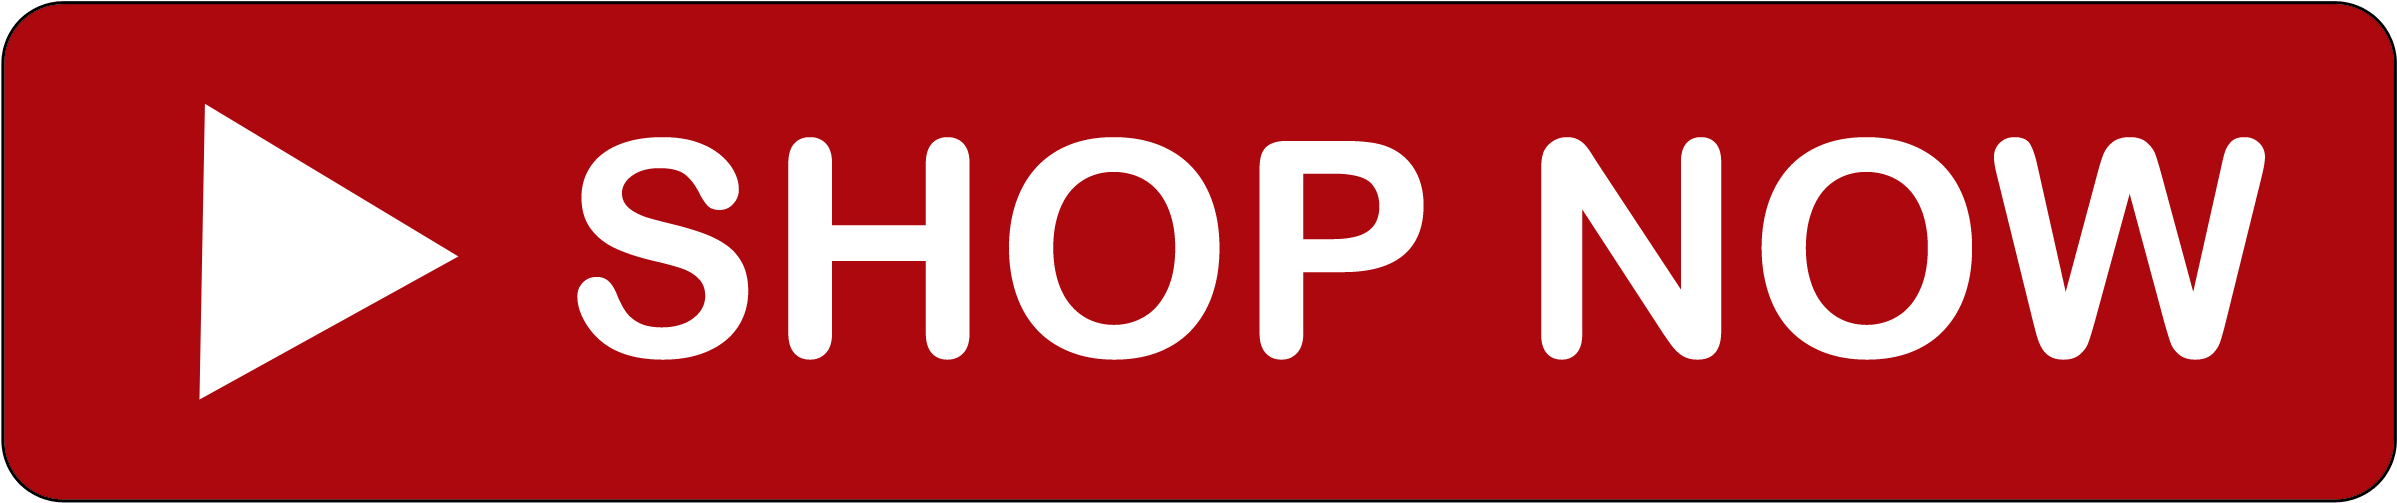 Red Shop Now Button PNG